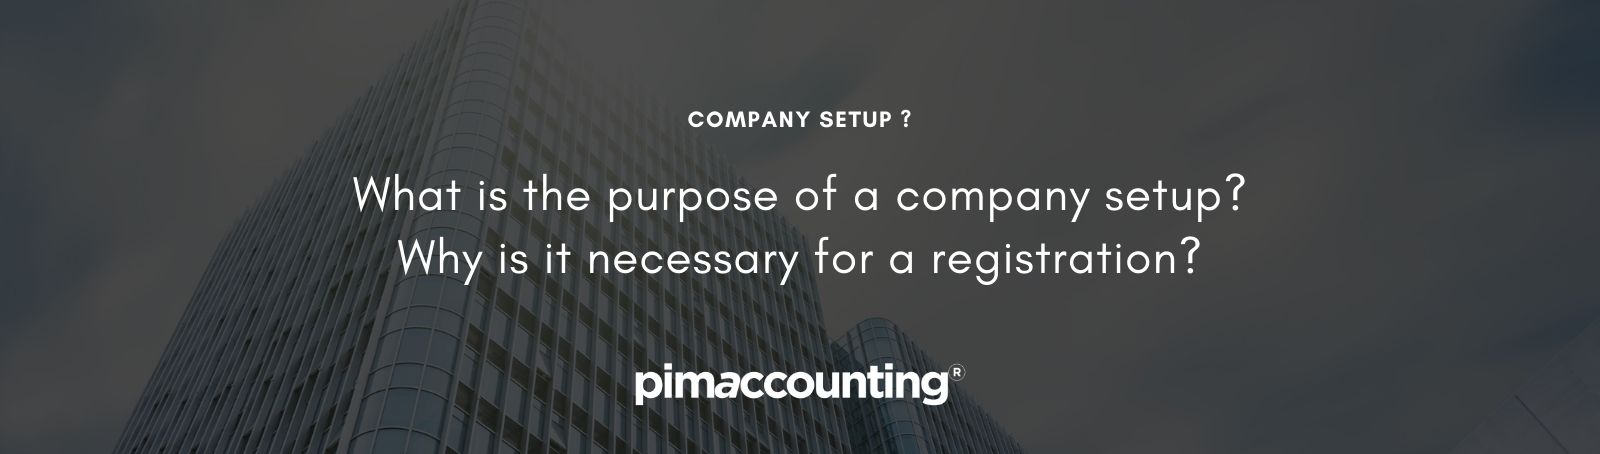 What is the purpose of a company setup? Why is it necessary for a registration?